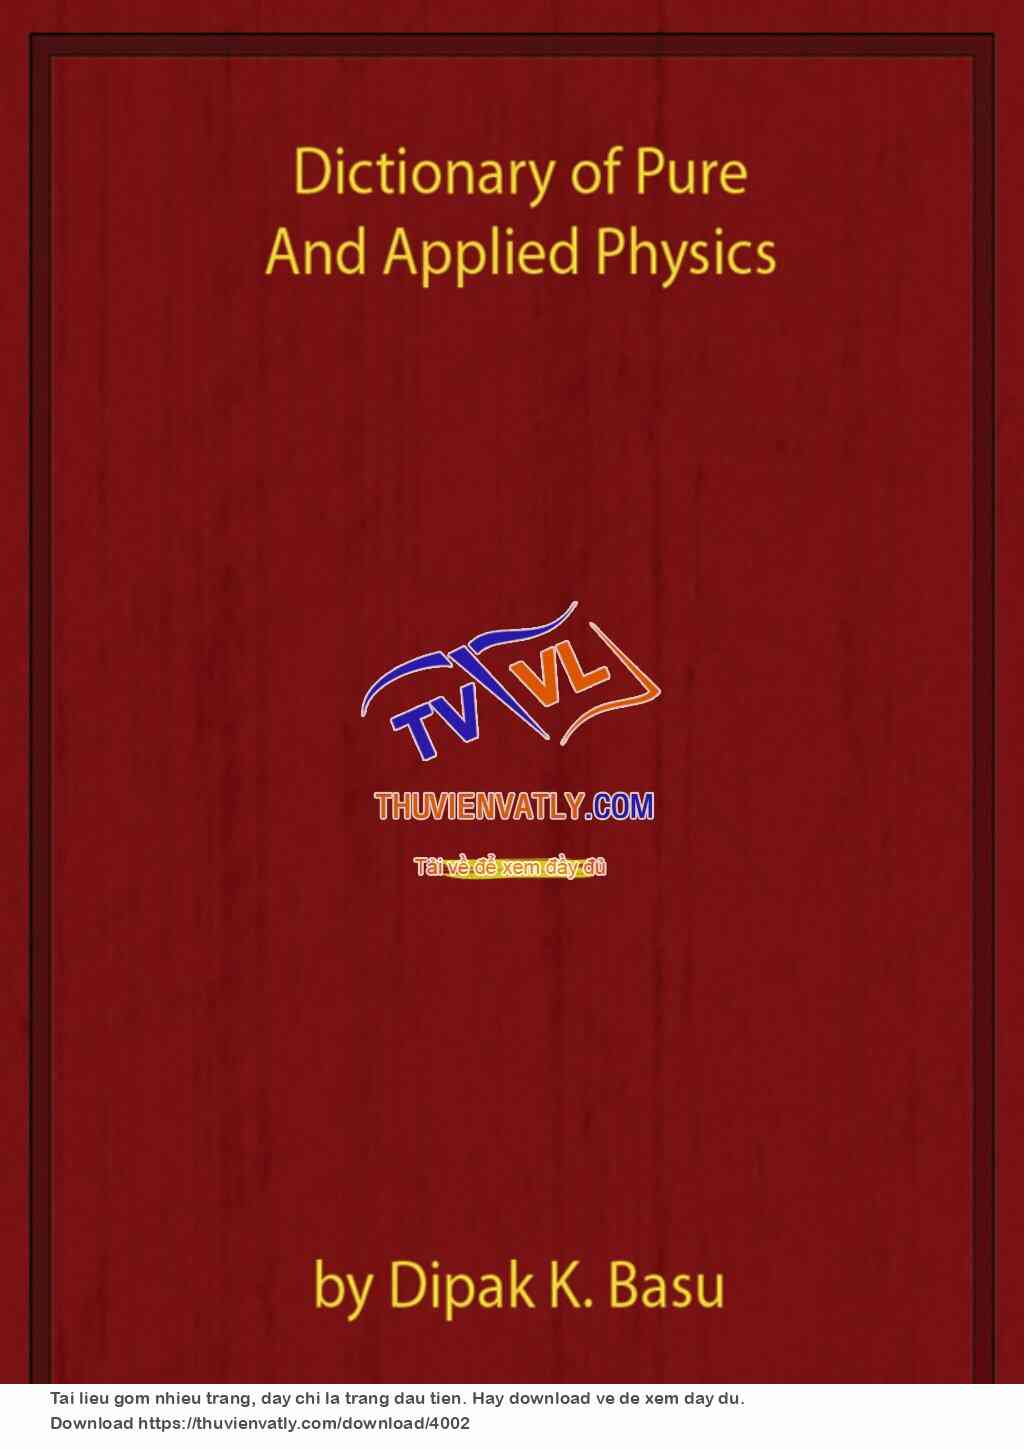 Dictionary of Pure and Applied Physics - Part 1